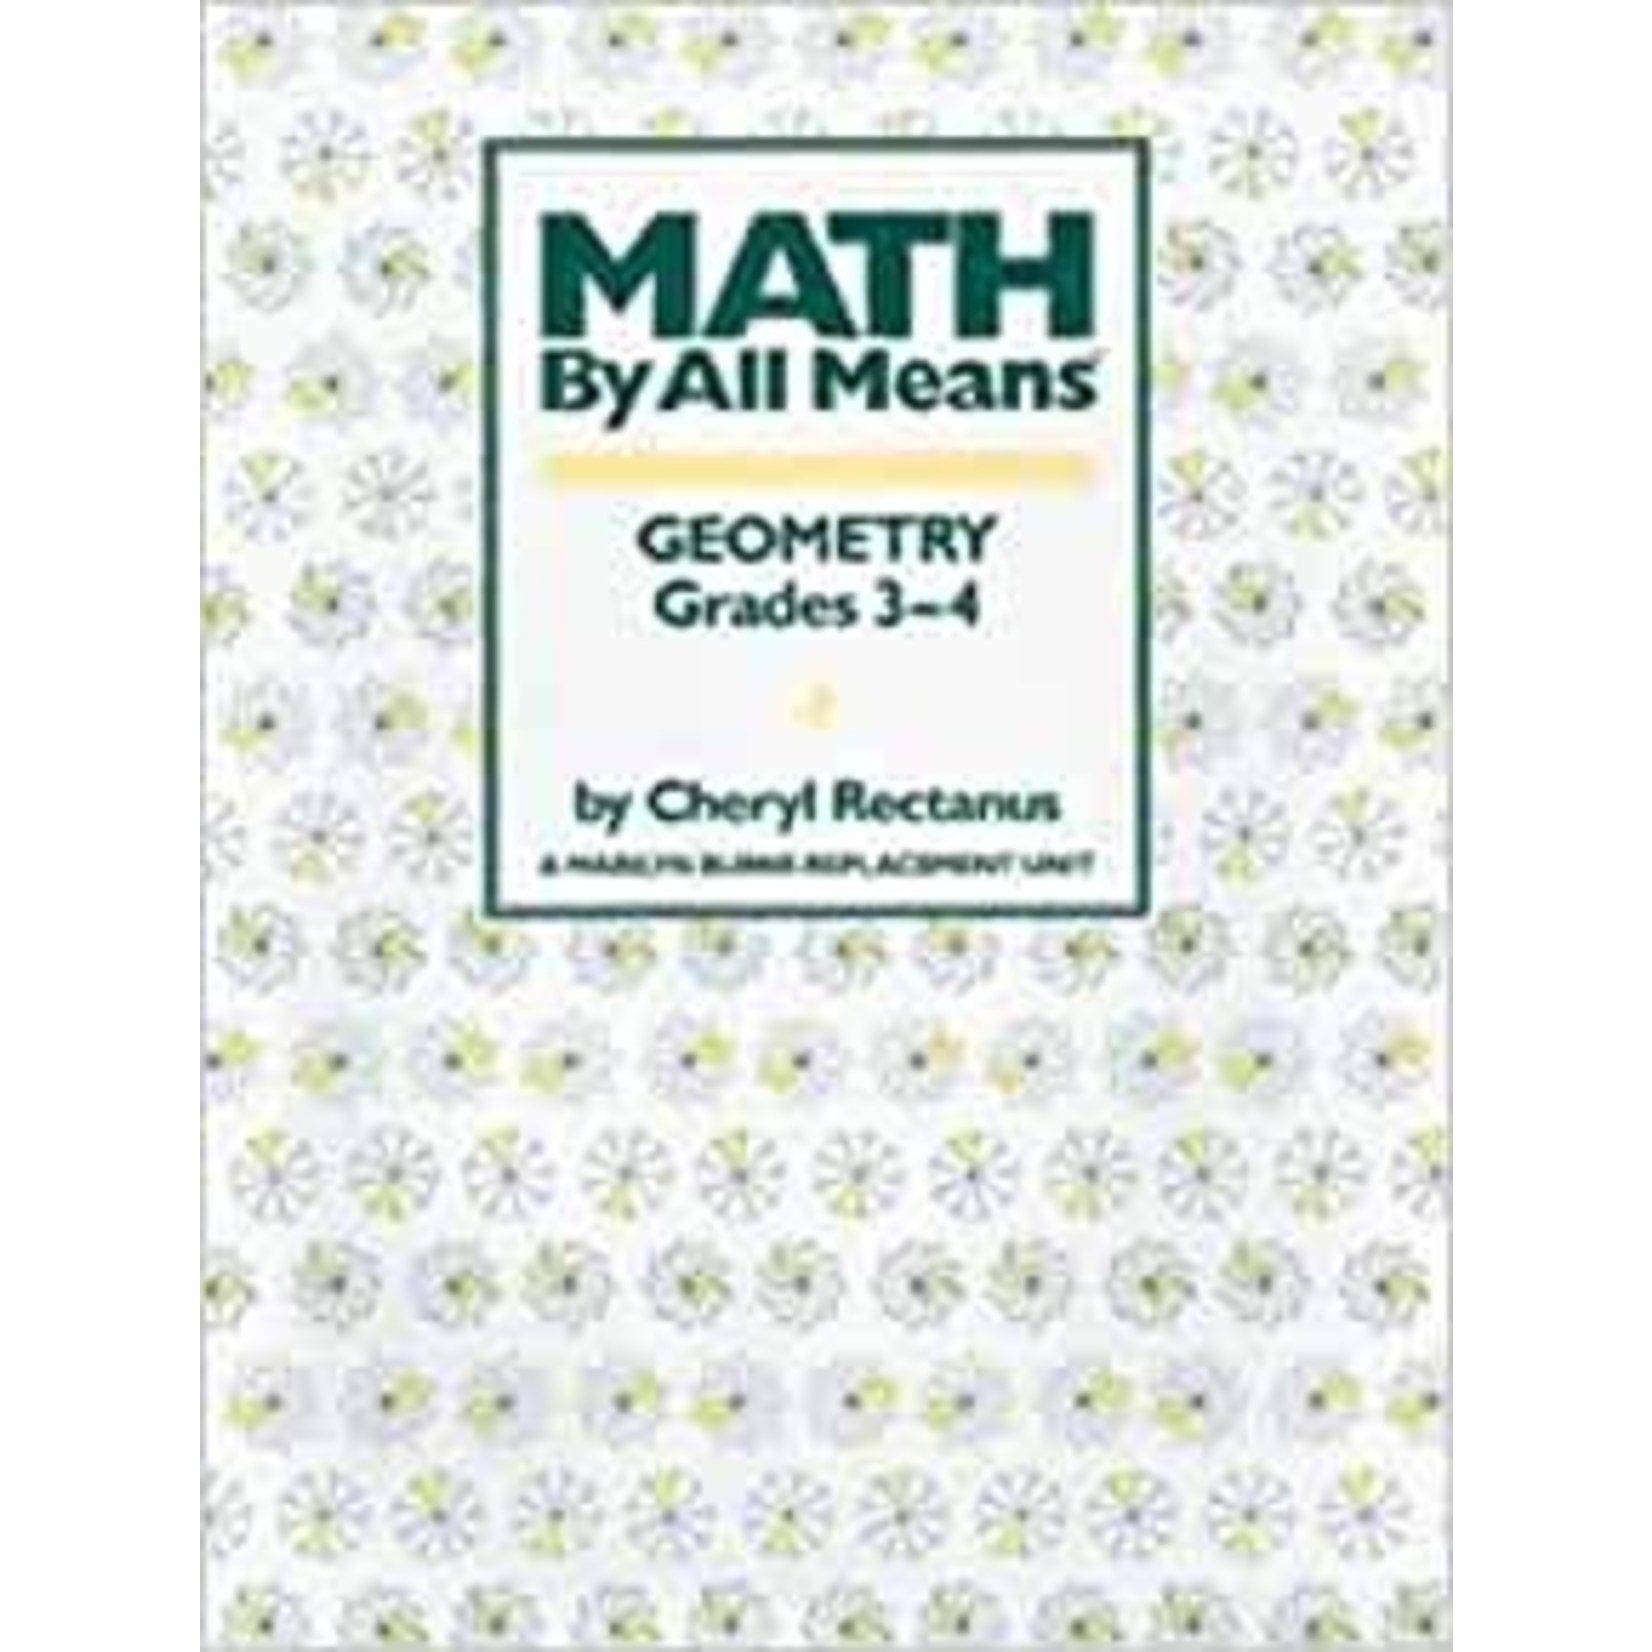 Geometry, Grades 3-4 (Math by All Means)